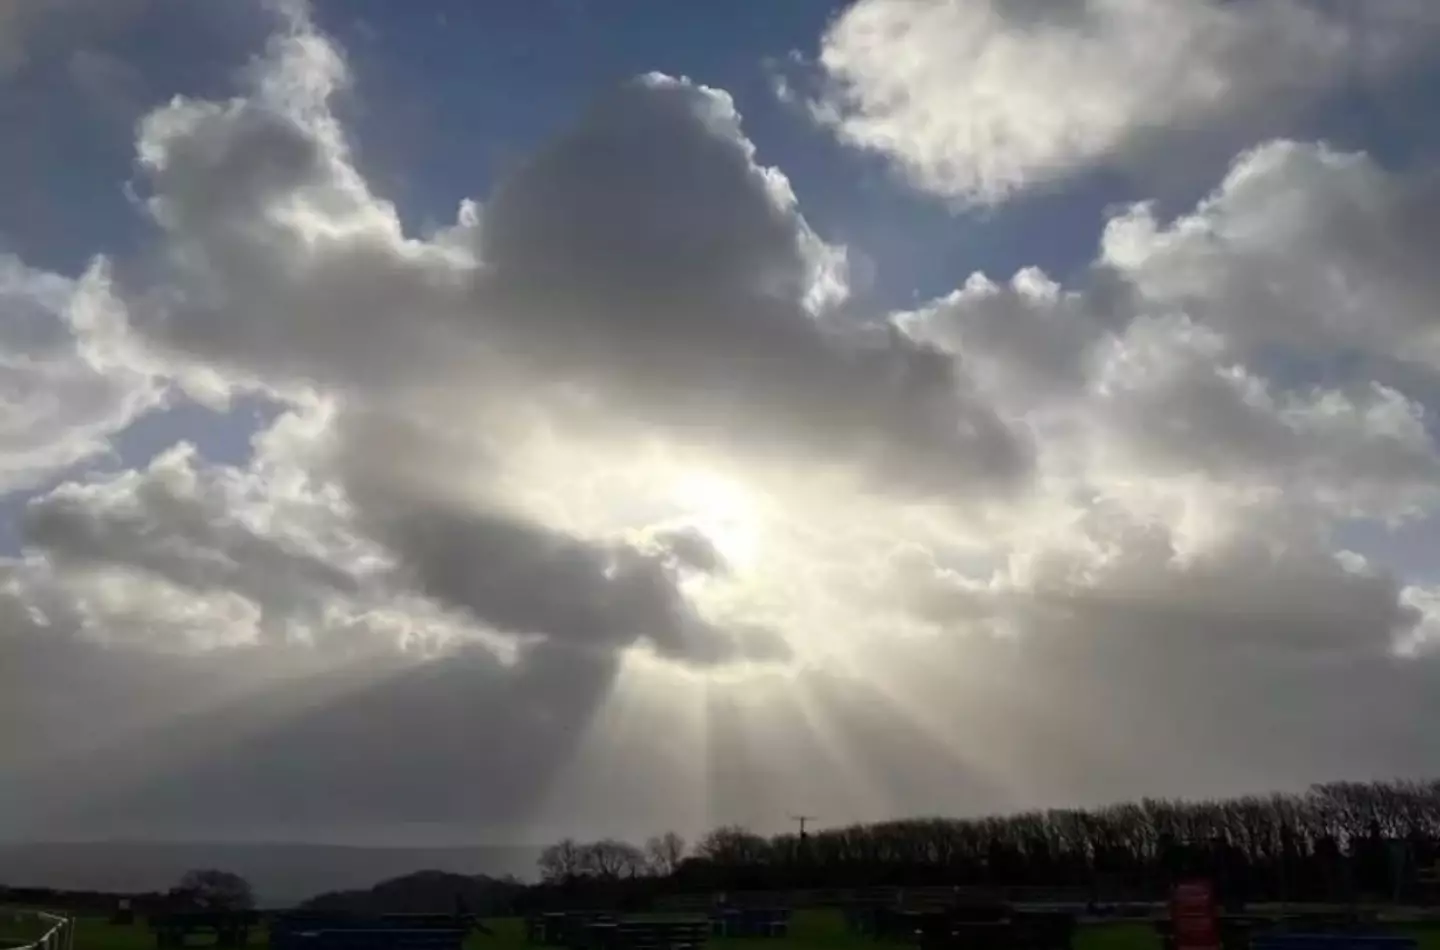 Tracey spotted the 'angel' in the sky.